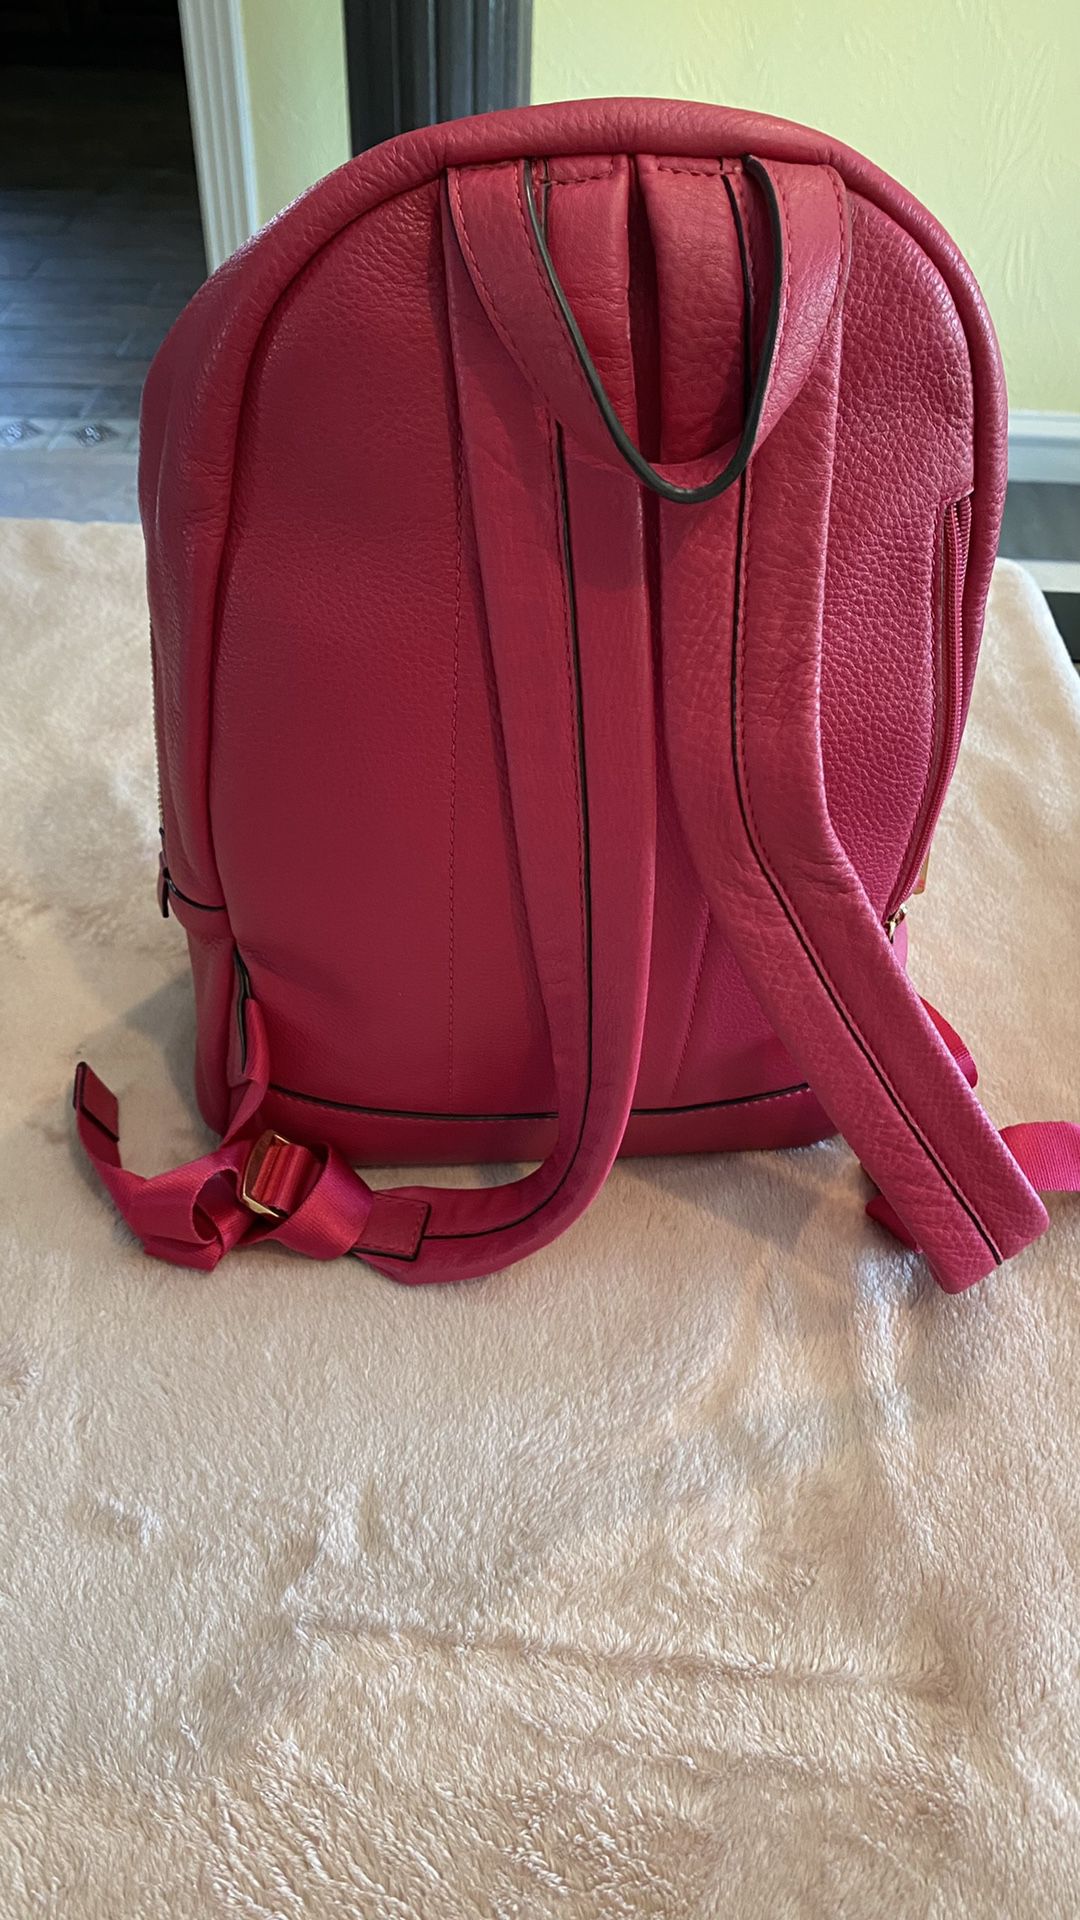 Michael Kors Backpack Purse And Wallet 